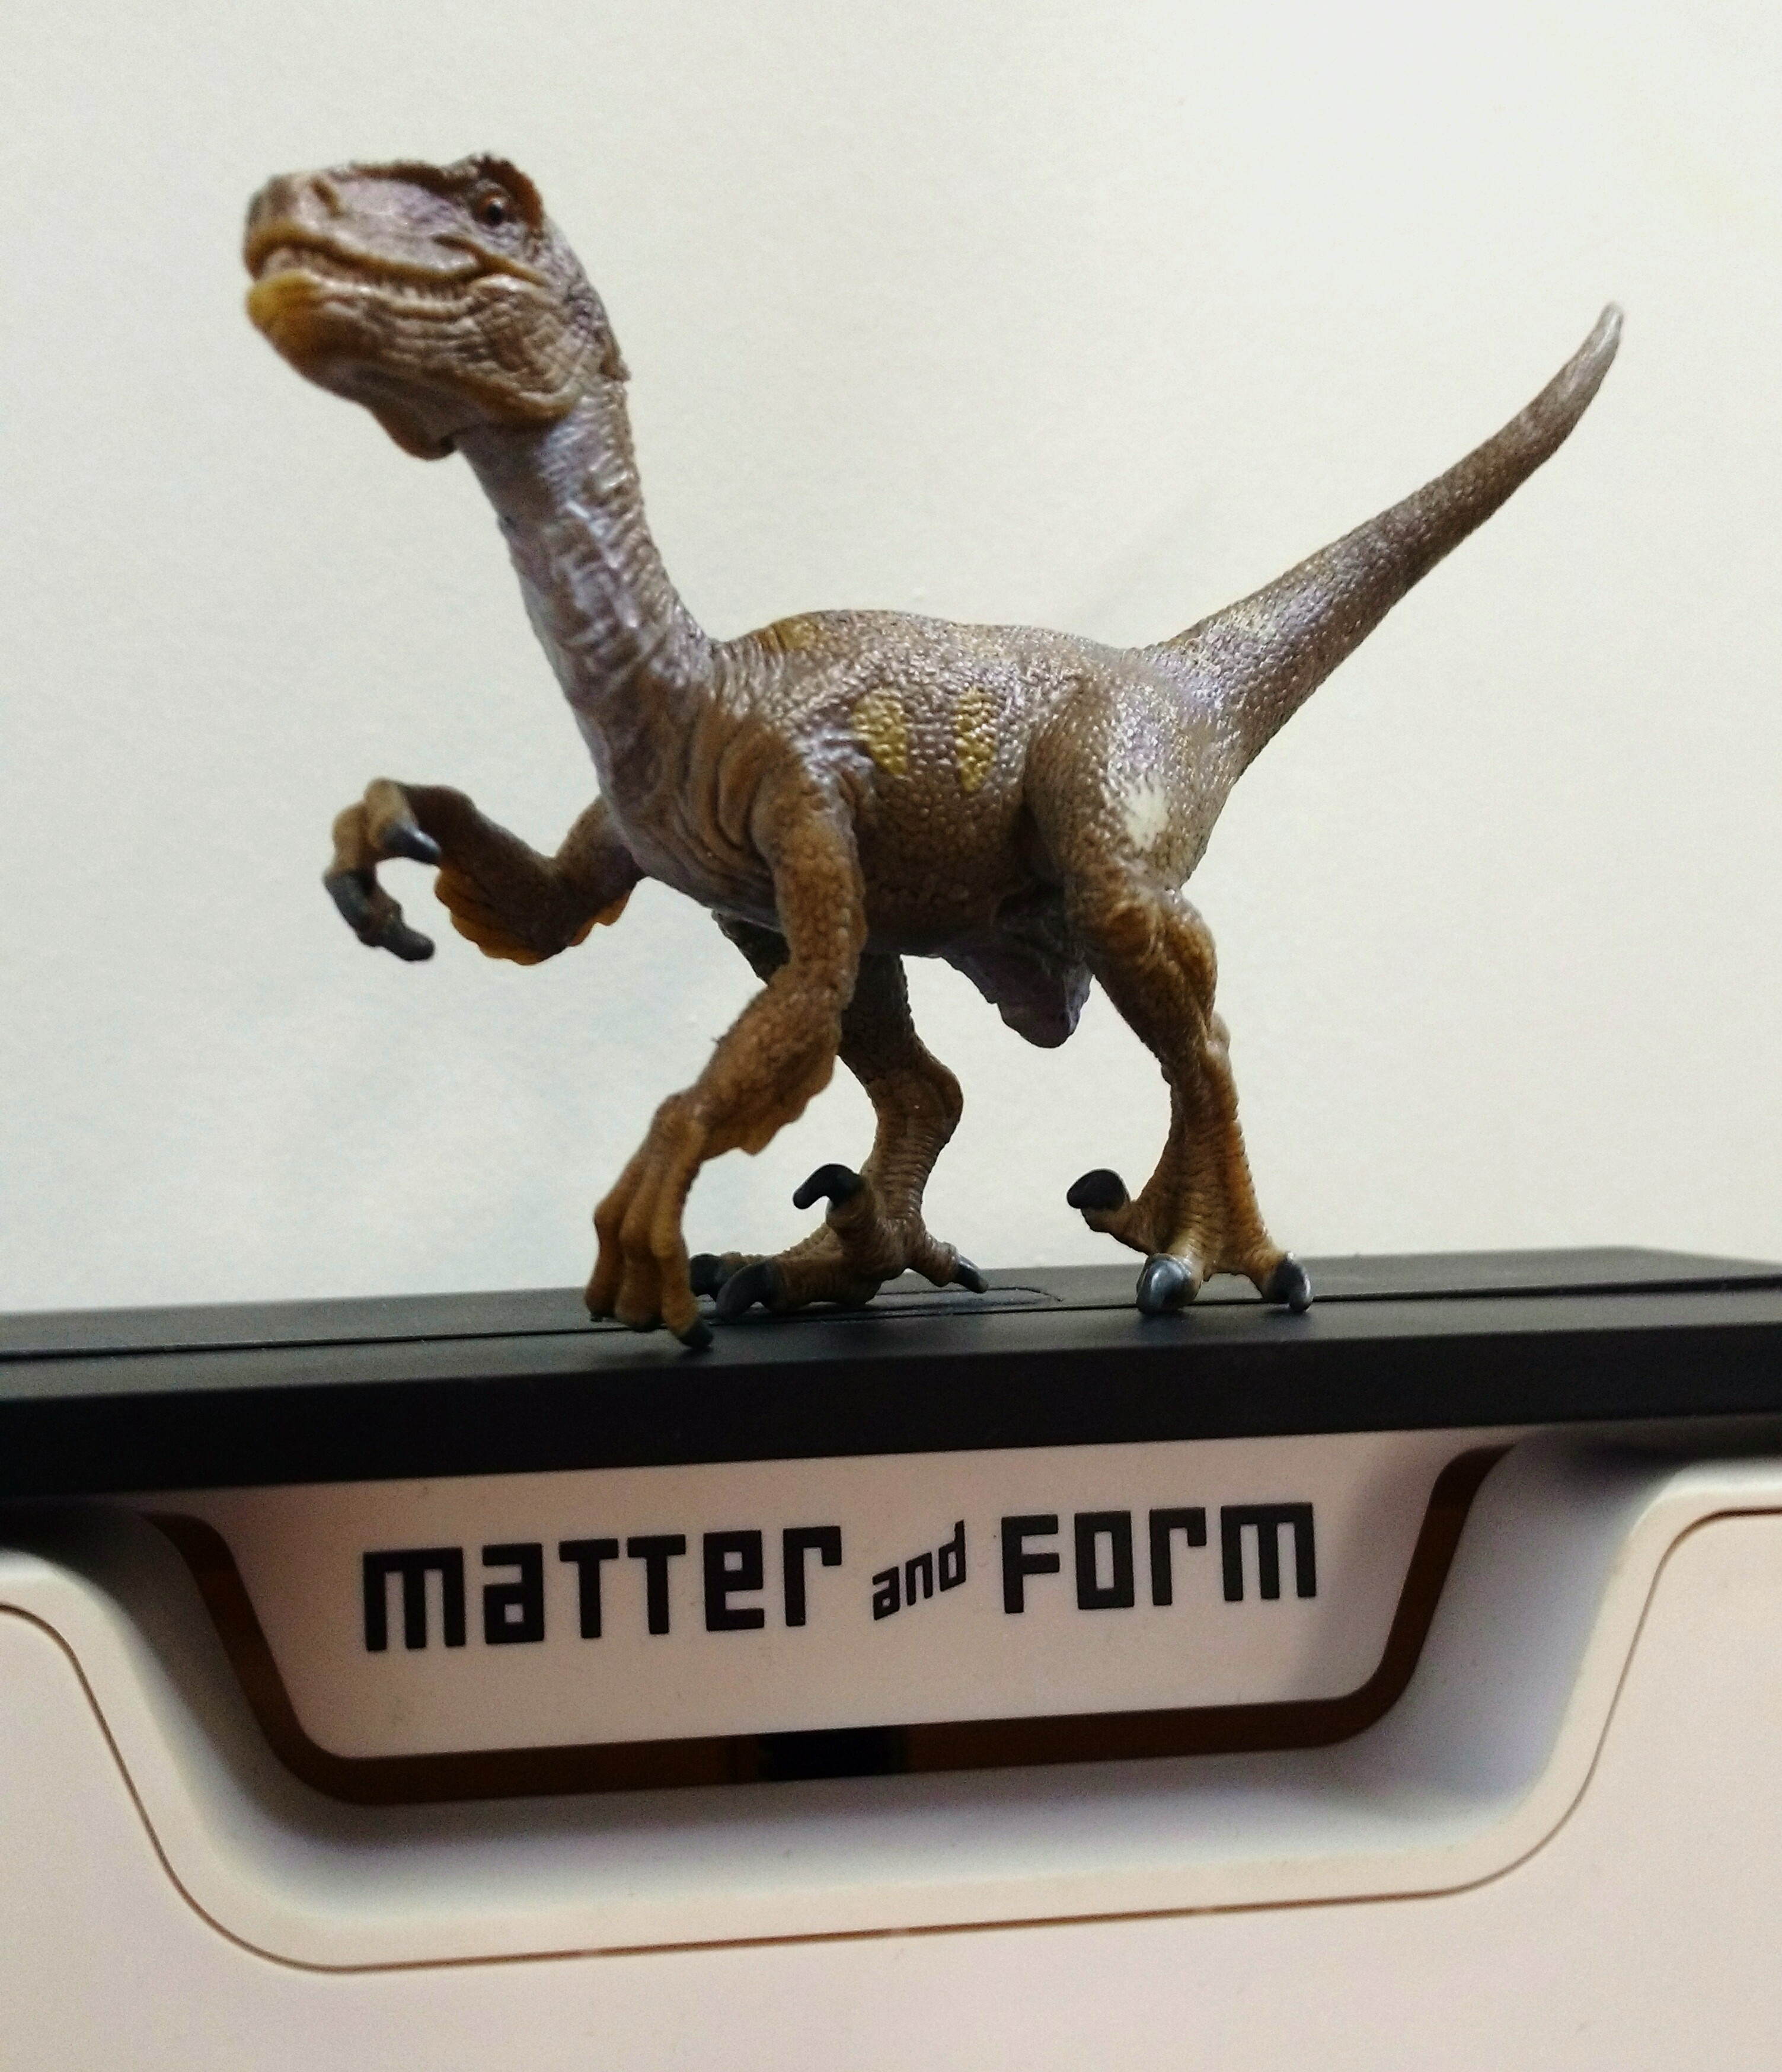 How to Make Your Own 3D Company Mascot with a Figurine